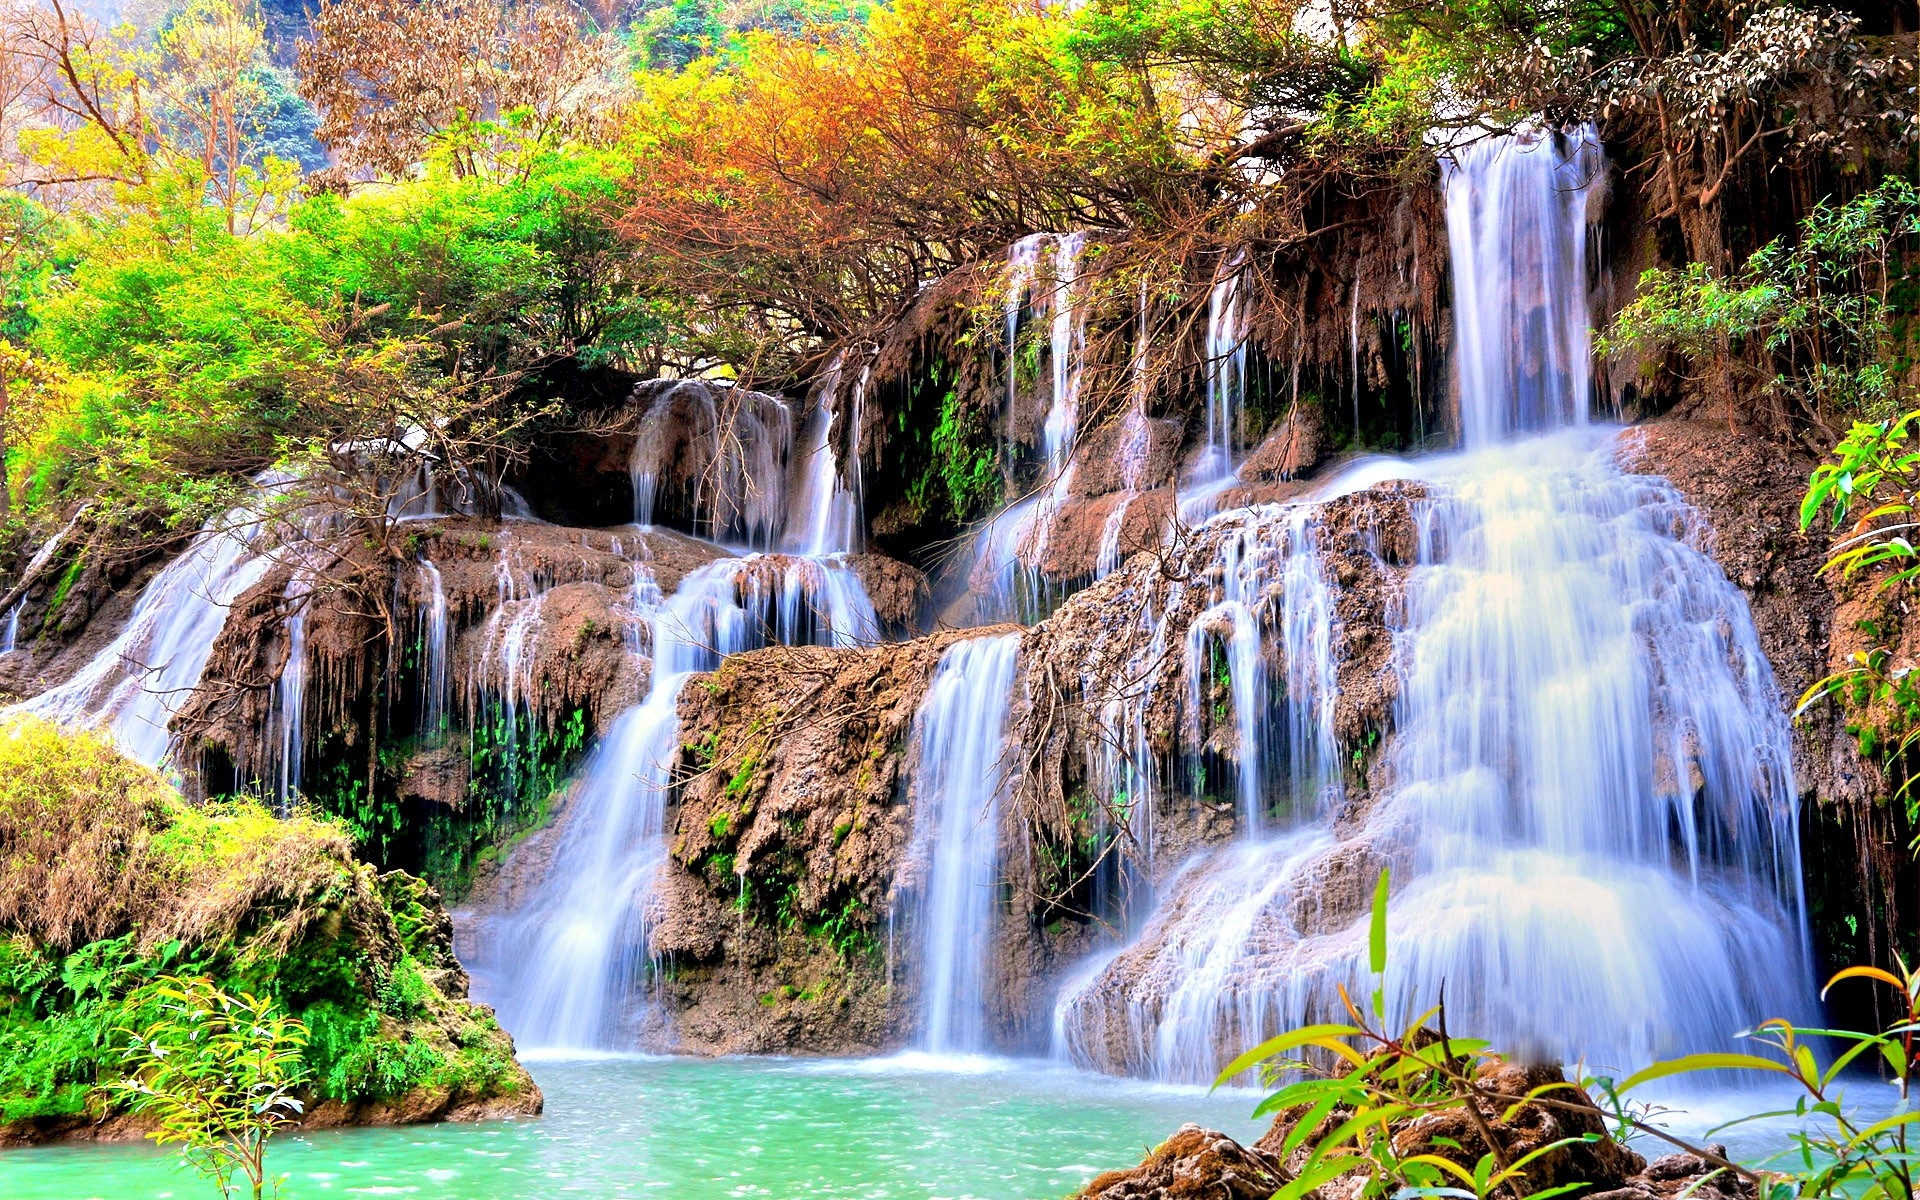 Large waterfall with green water